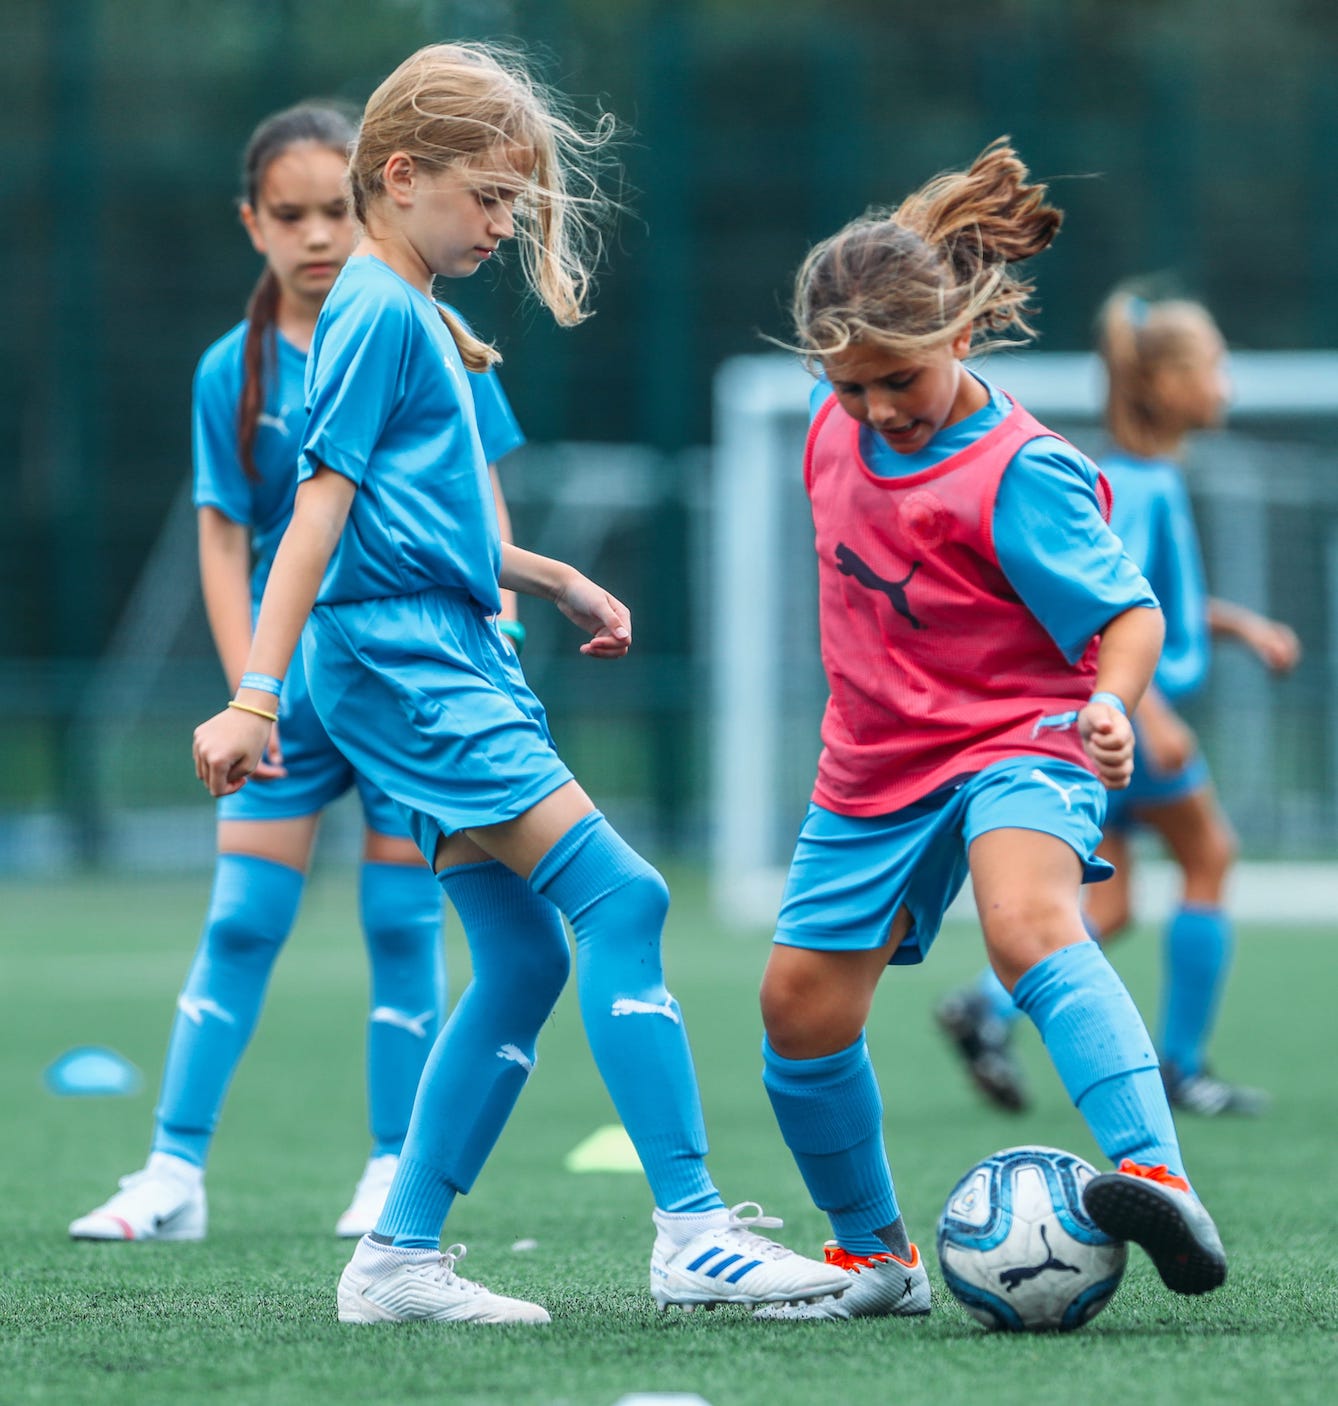 Two young girls playing football at the City Football Academy. One girl is wearing a red bib and is in possession of the ball.